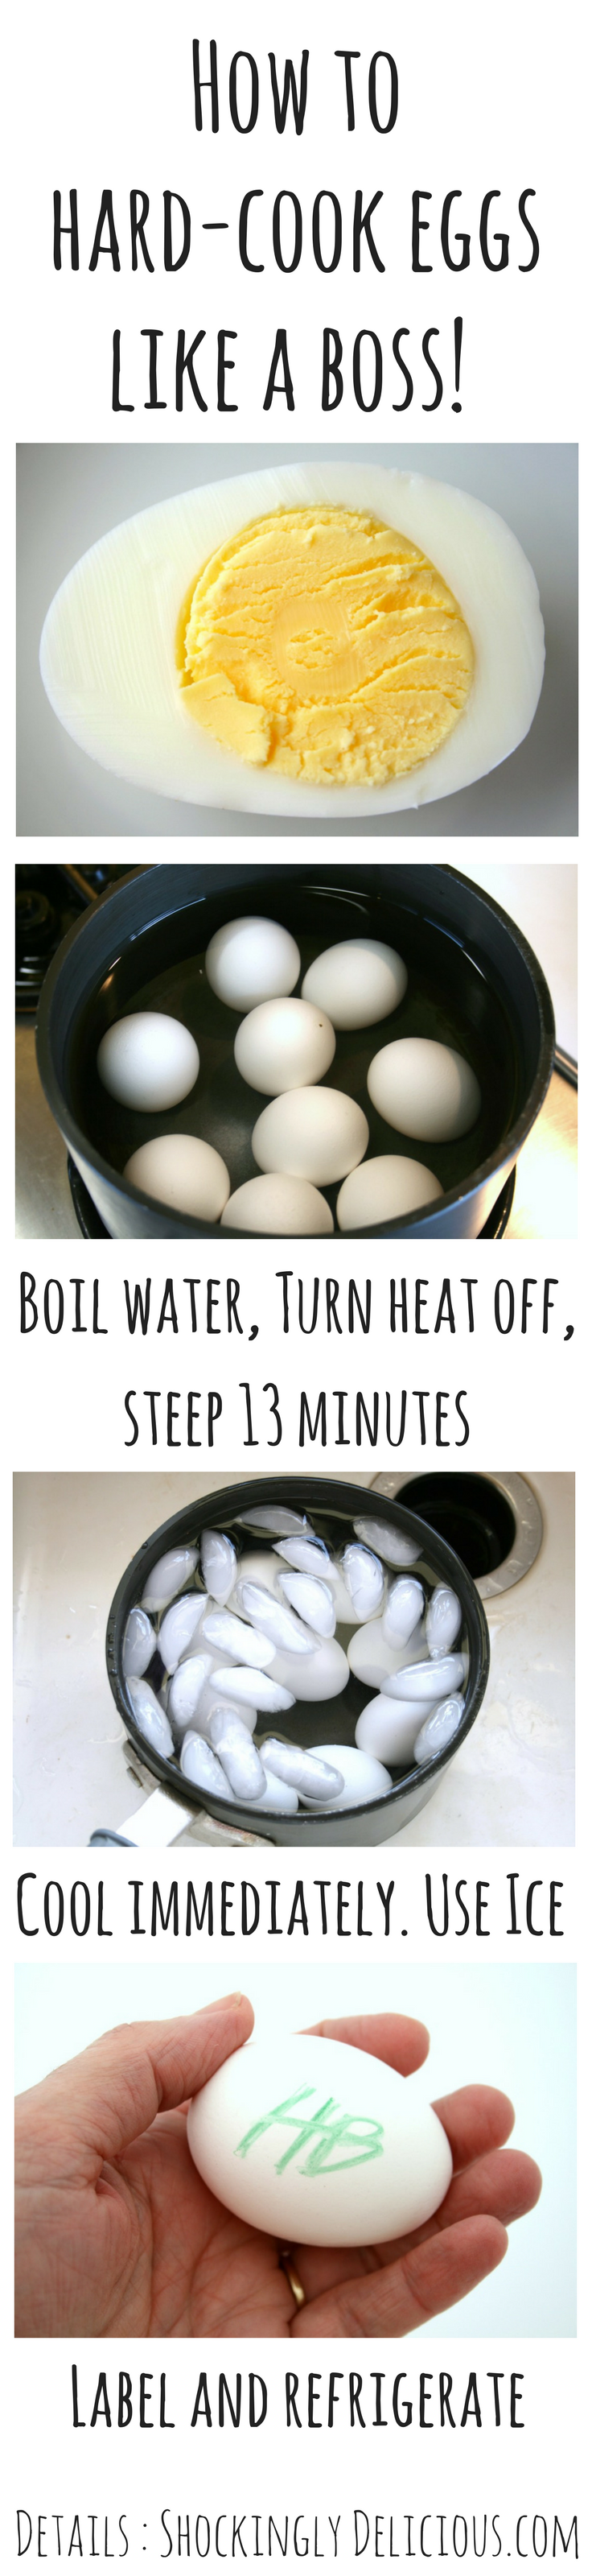 How to hard-cook eggs like a boss on ShockinglyDelicious